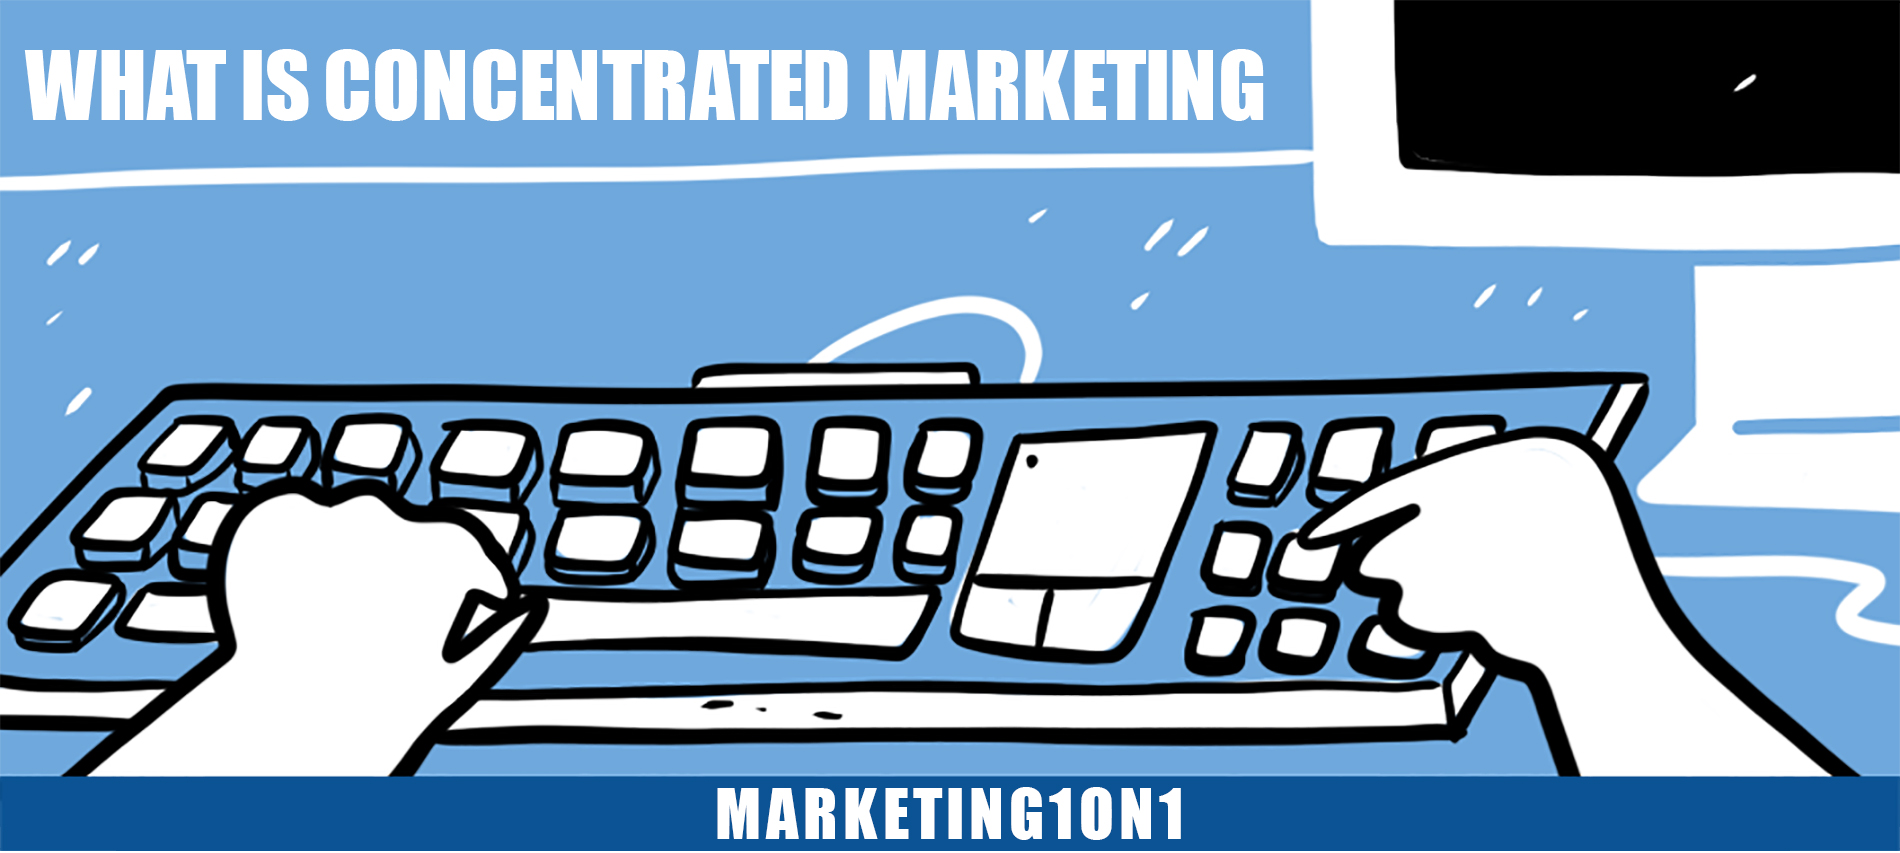 What is concentrated marketing and how to implement concentrated marketing strategy?